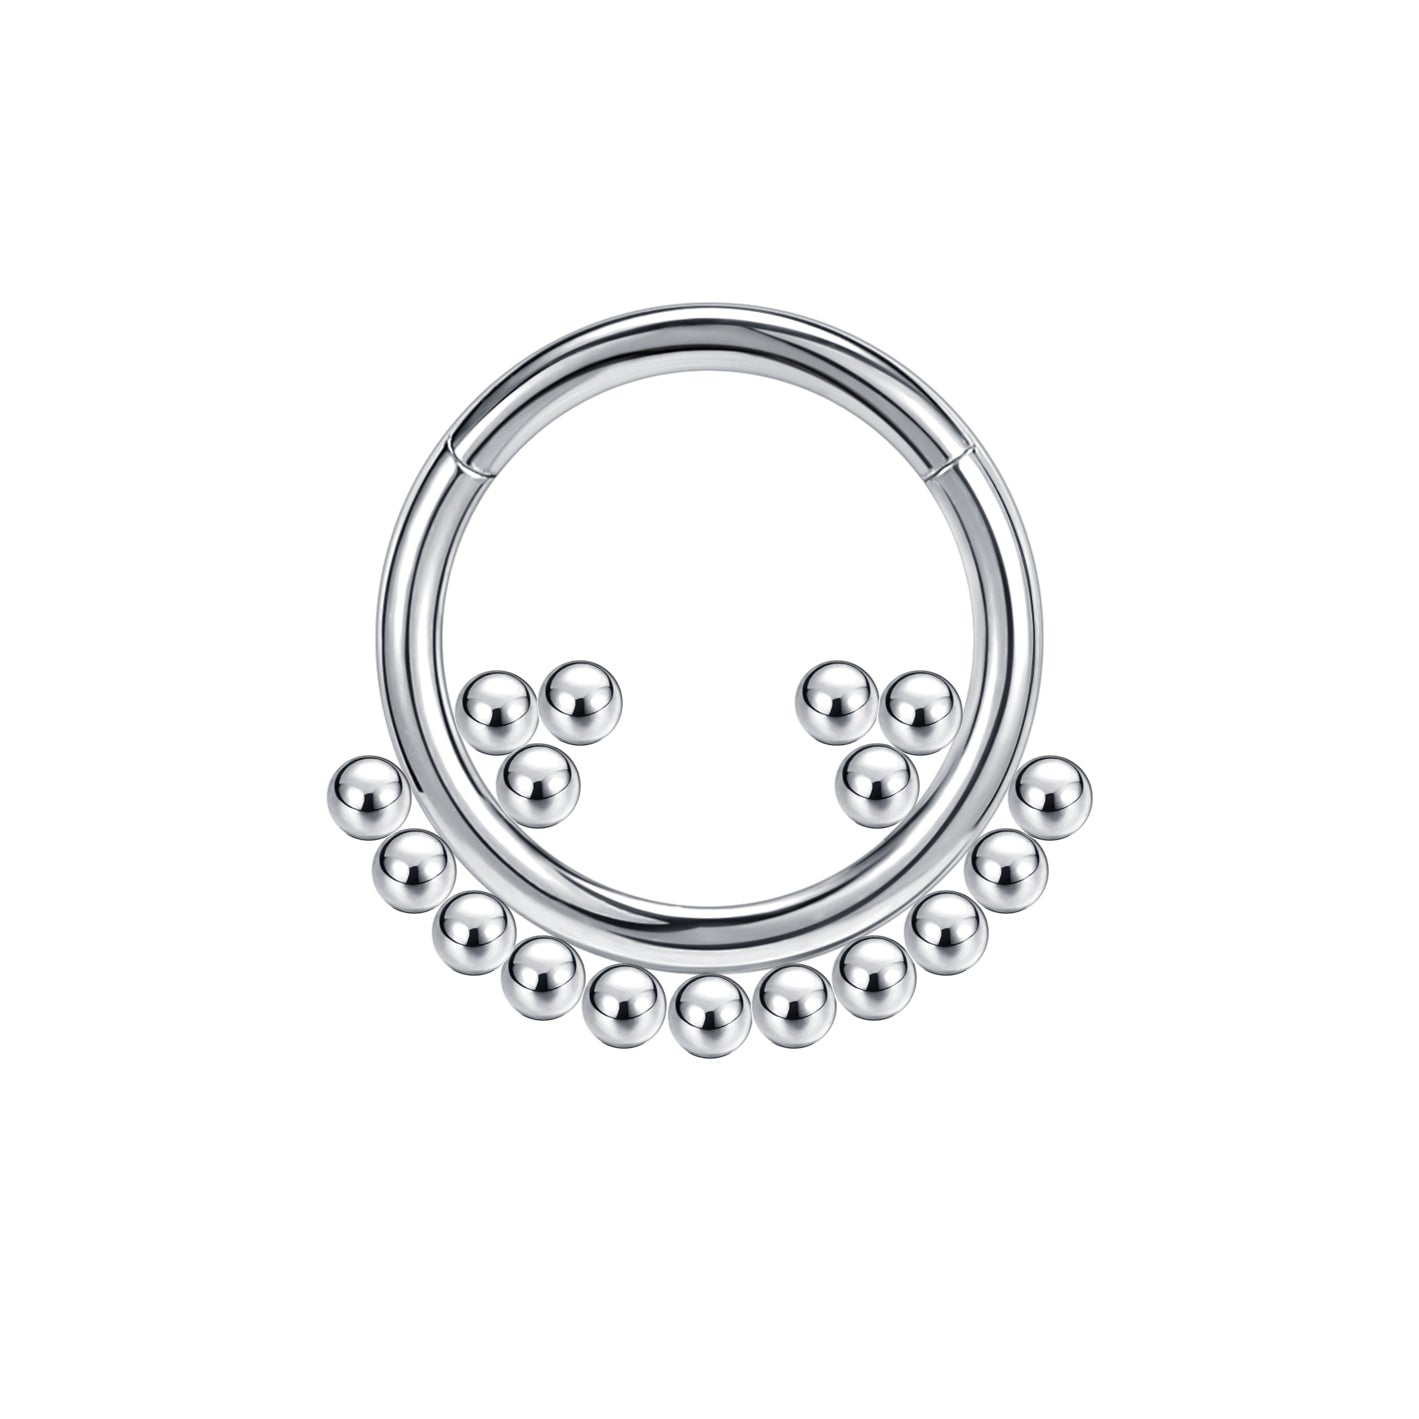 16g-stainless-steel-nose-septum-ring-ball-clicker-cartilage-helix-piercing